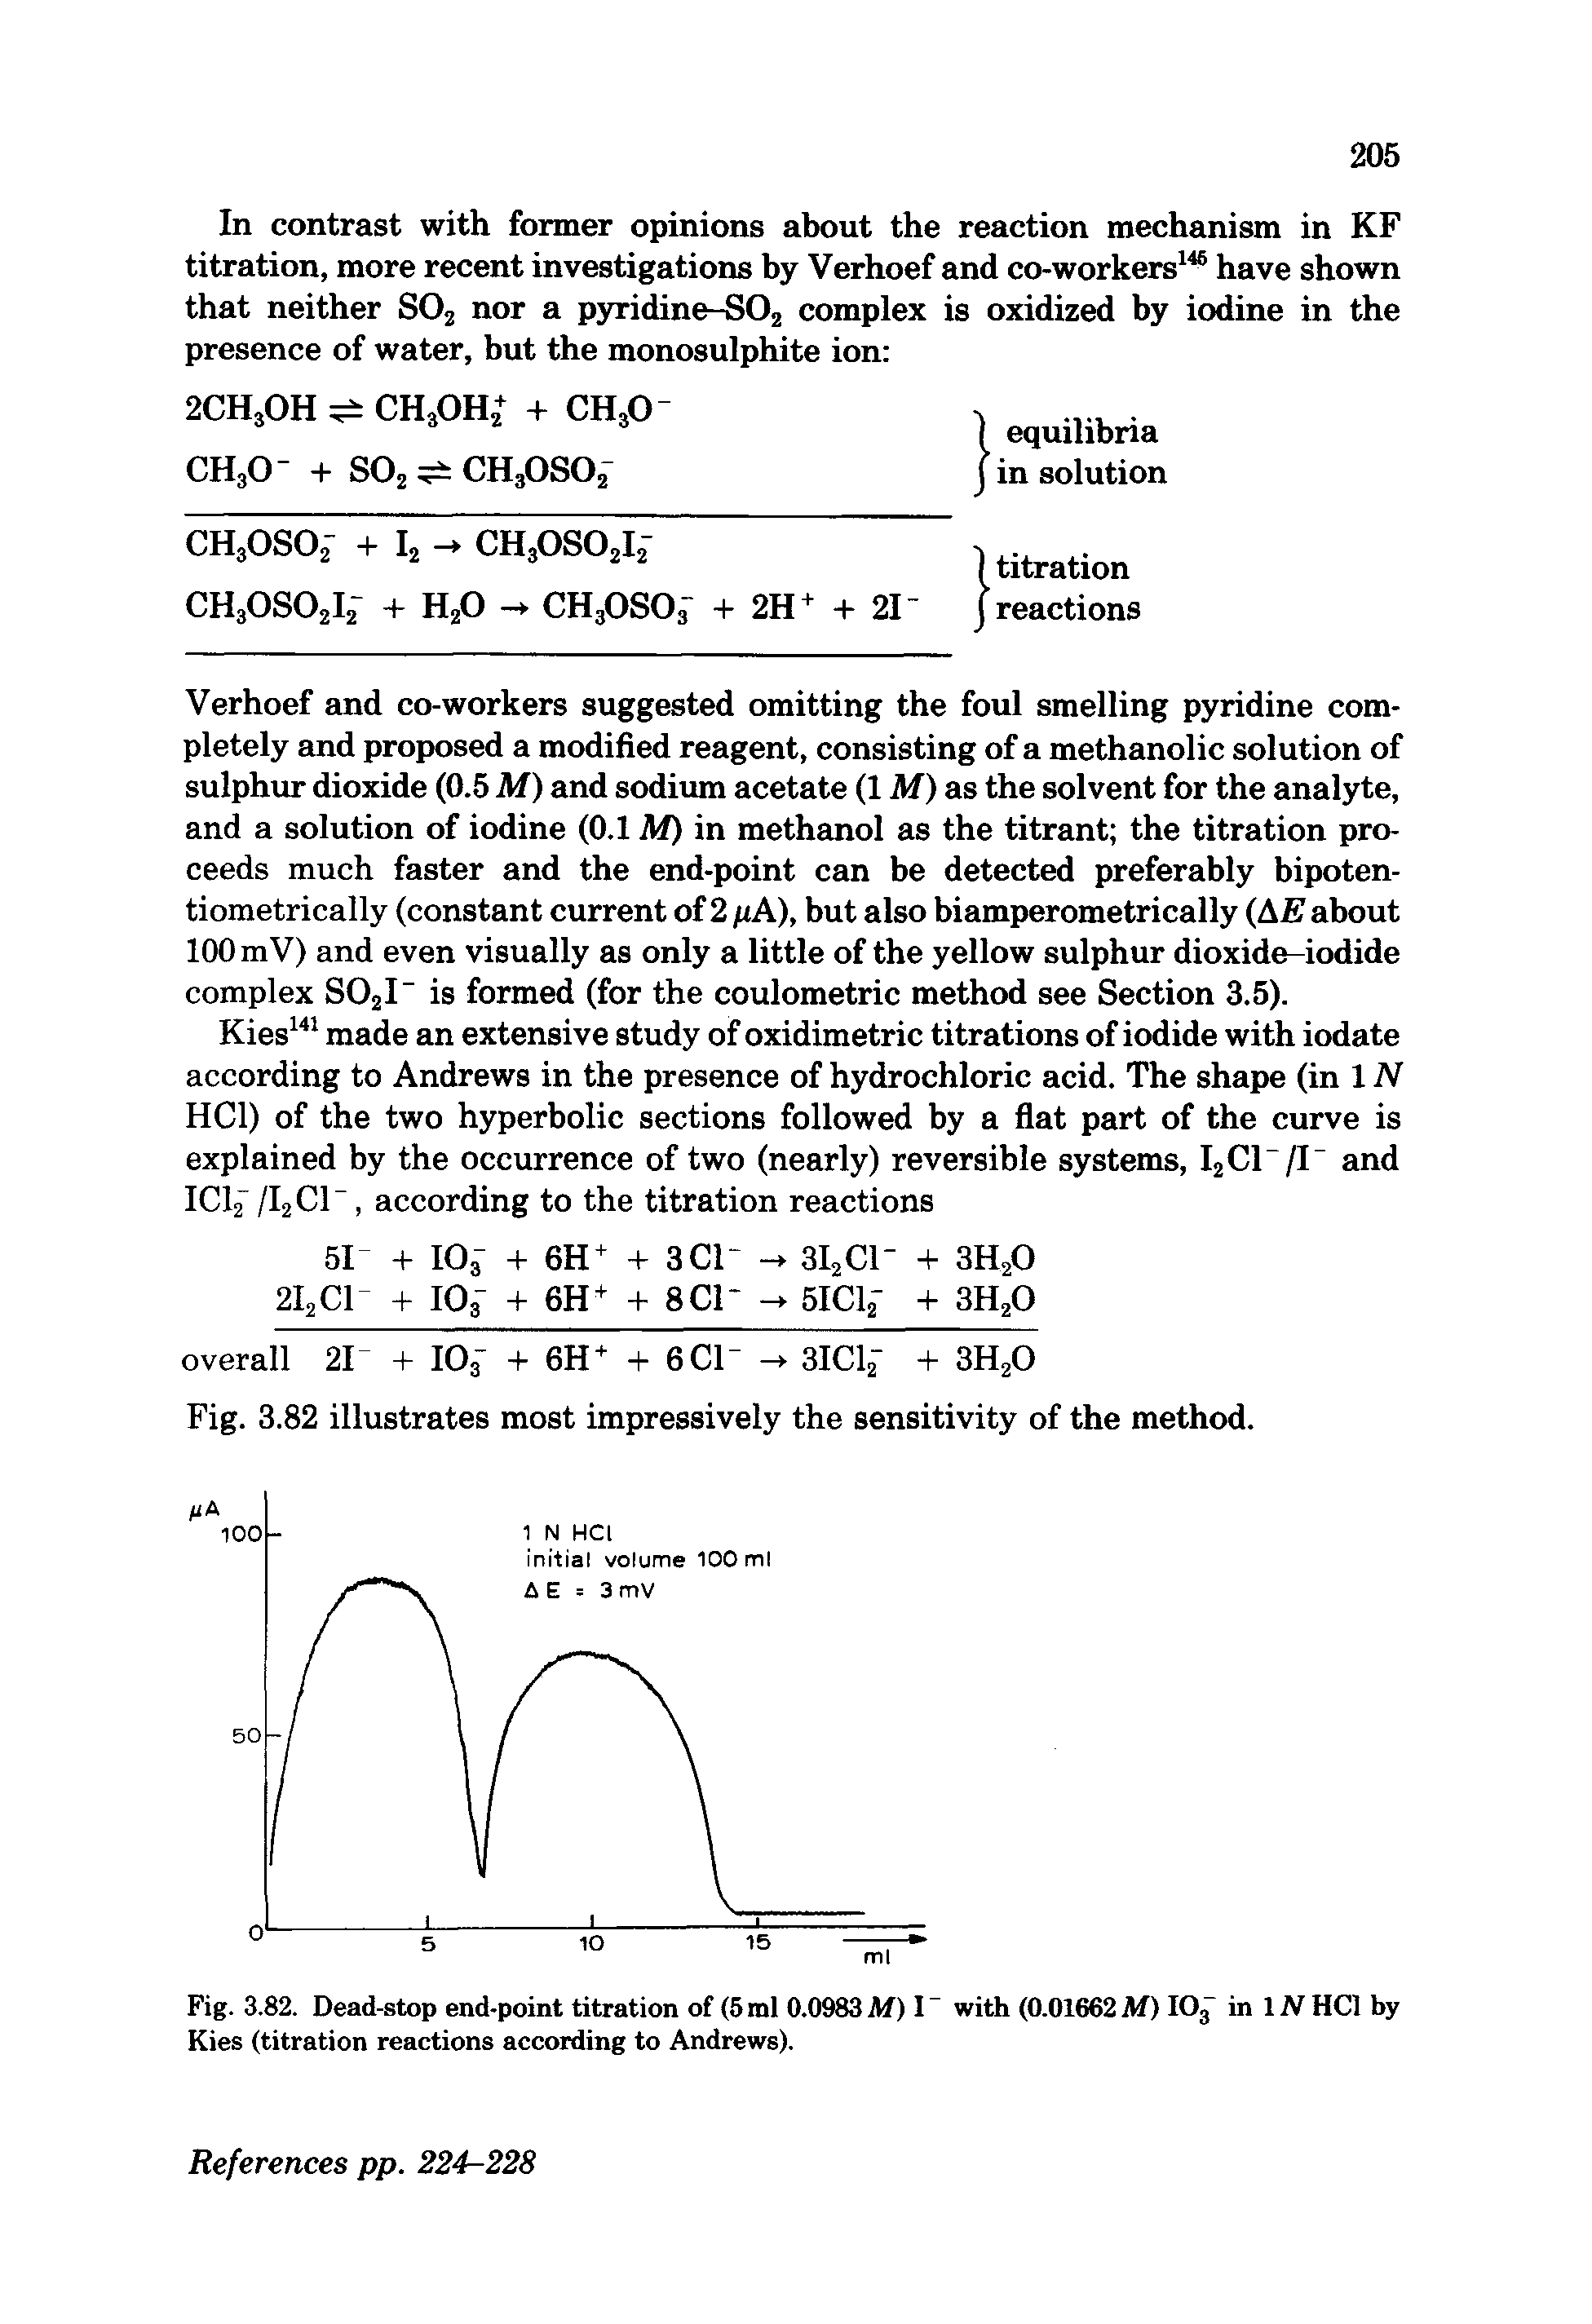 Fig. 3.82. Dead-stop end-point titration of (5 ml 0.0983 M) I with (0.01662 M) I03 in 1 iV HC1 by Kies (titration reactions according to Andrews).